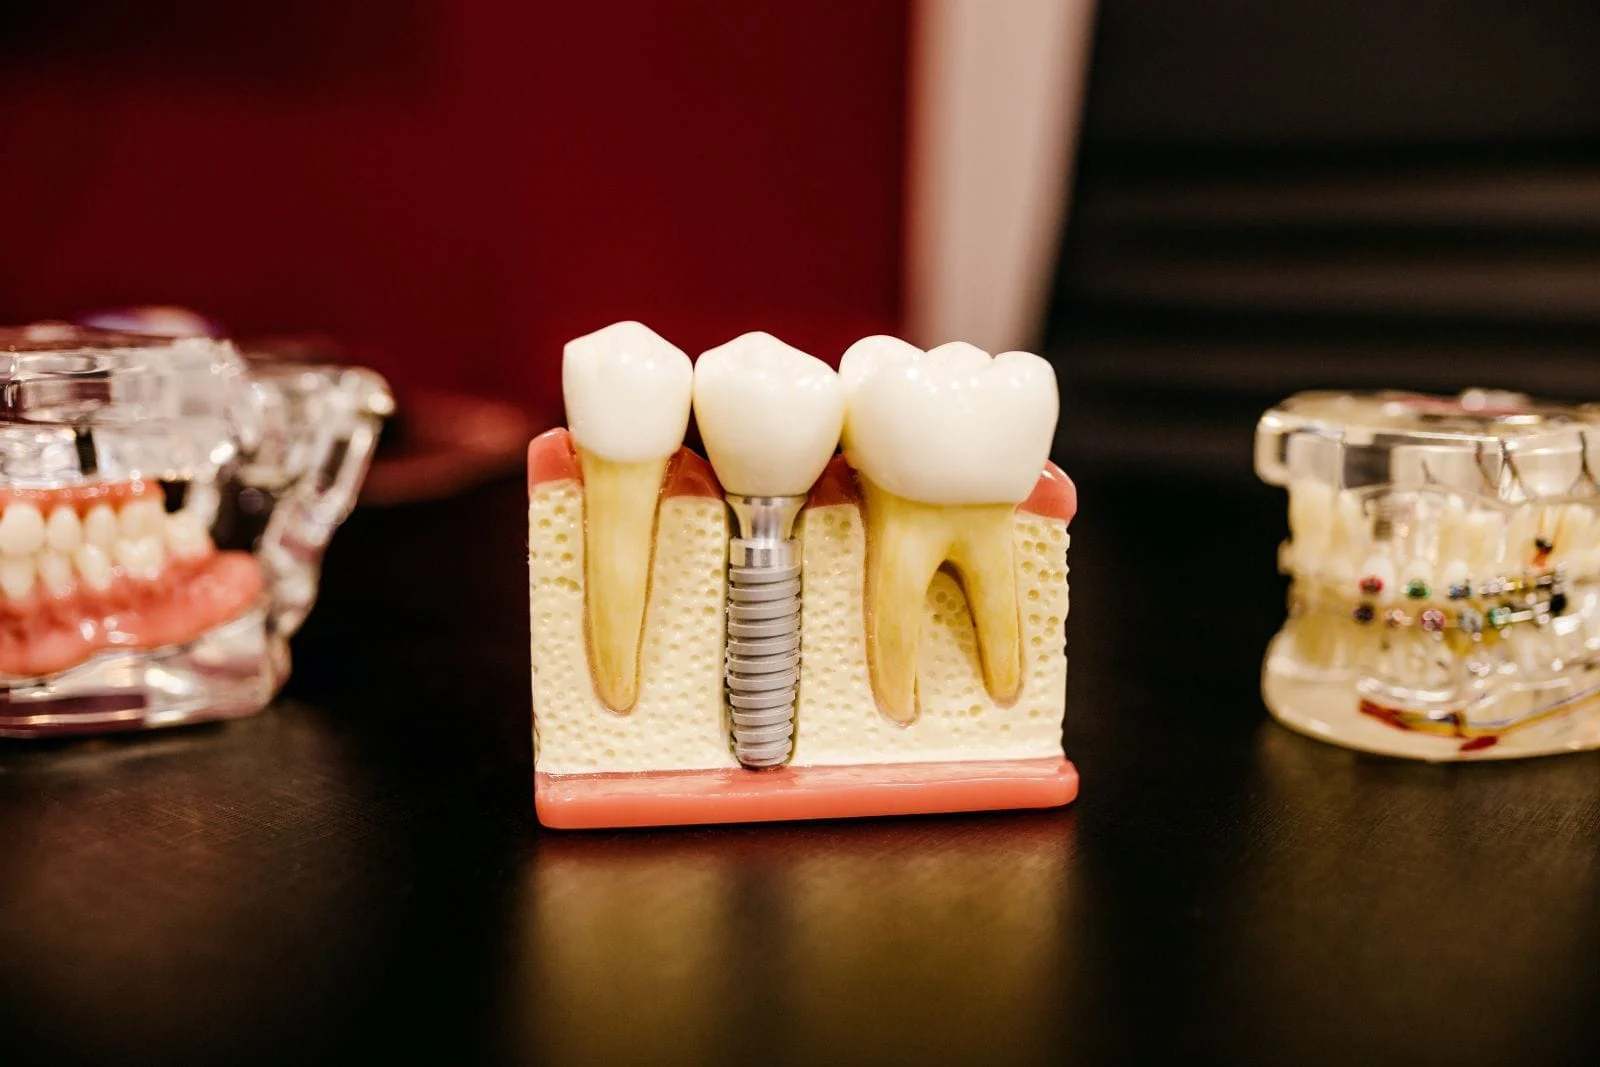 photograph of a model of a dental implant in a jaw